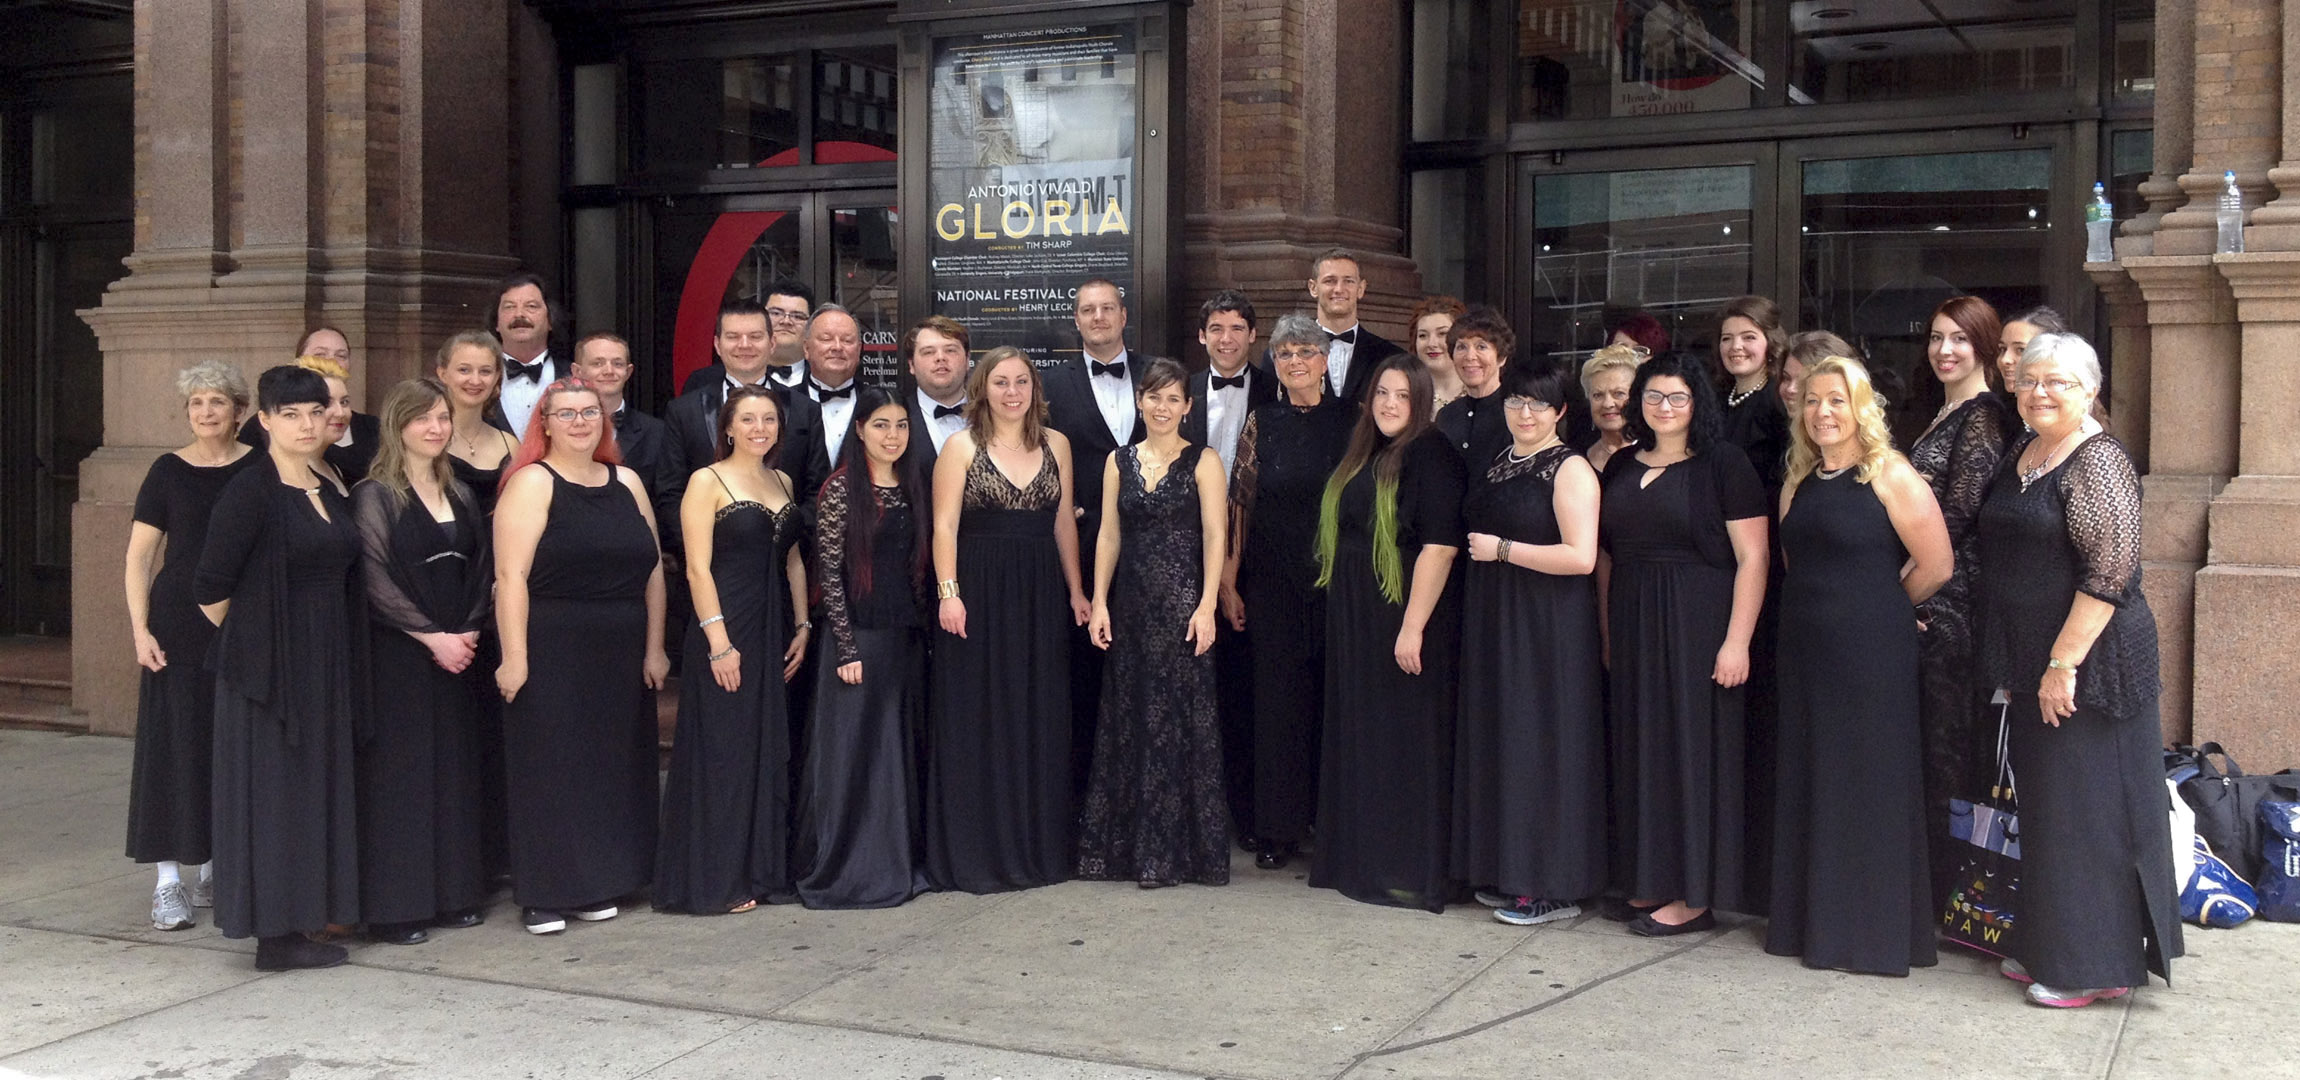 LCC Choir in black suites and dresses in front of carnegie hall